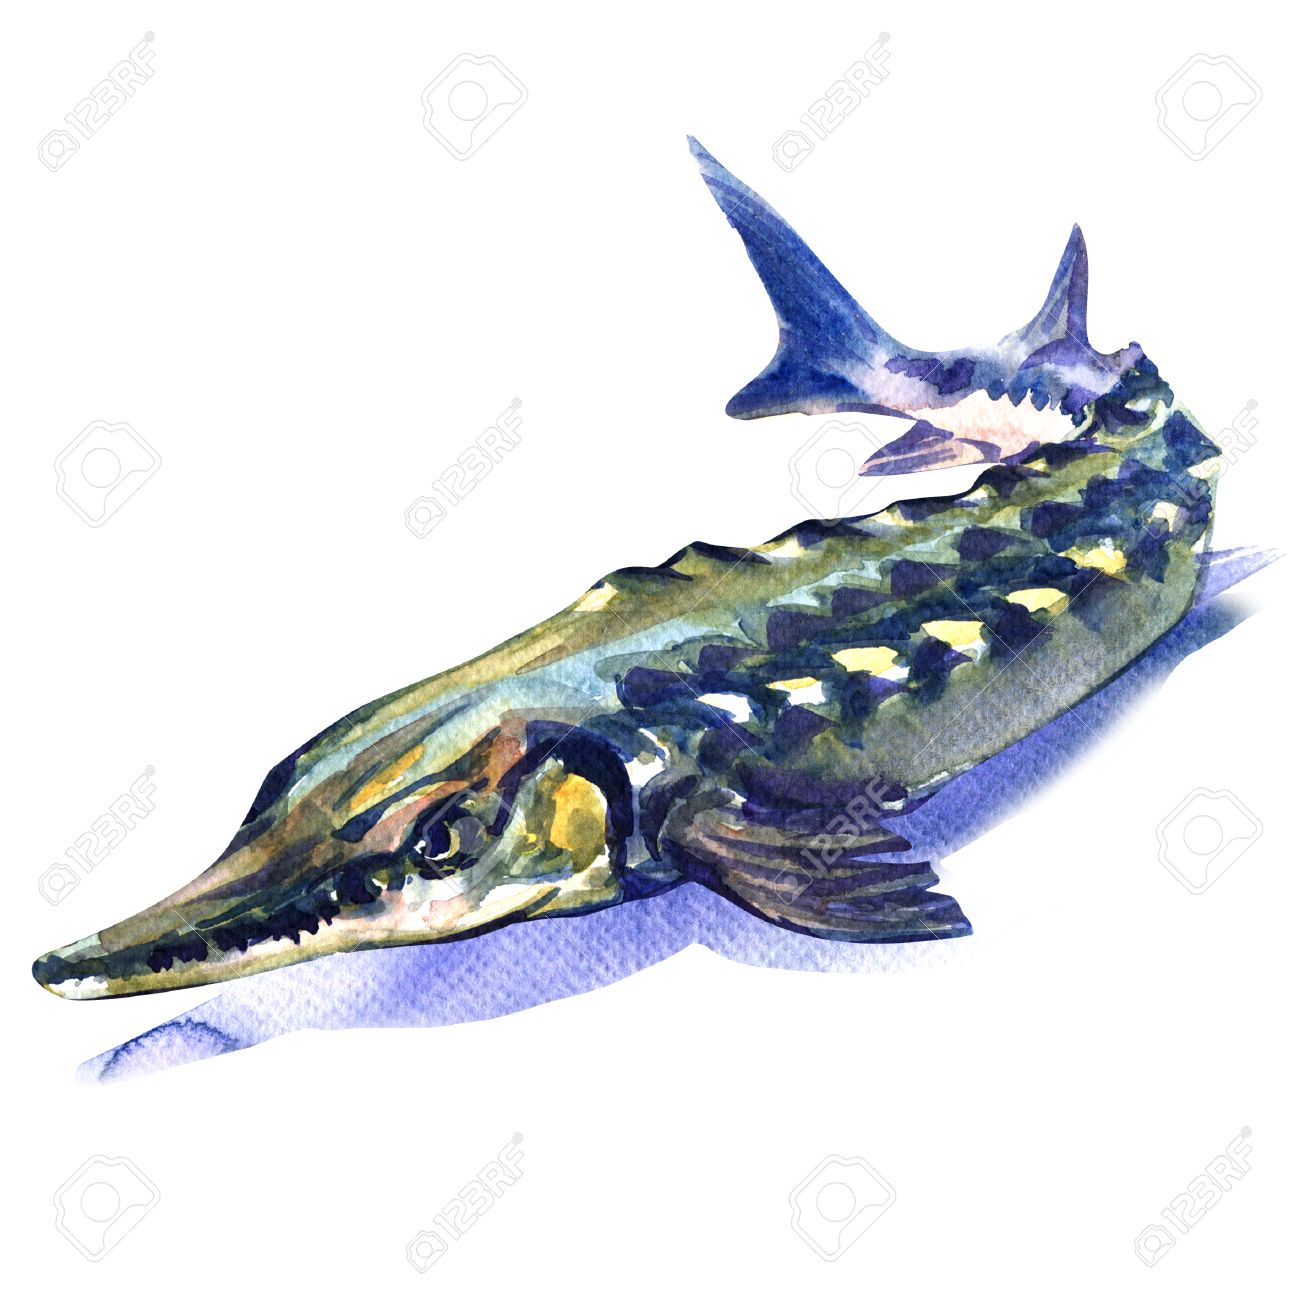 Fresh Sturgeon Fish Isolated Watercolor Painting On White